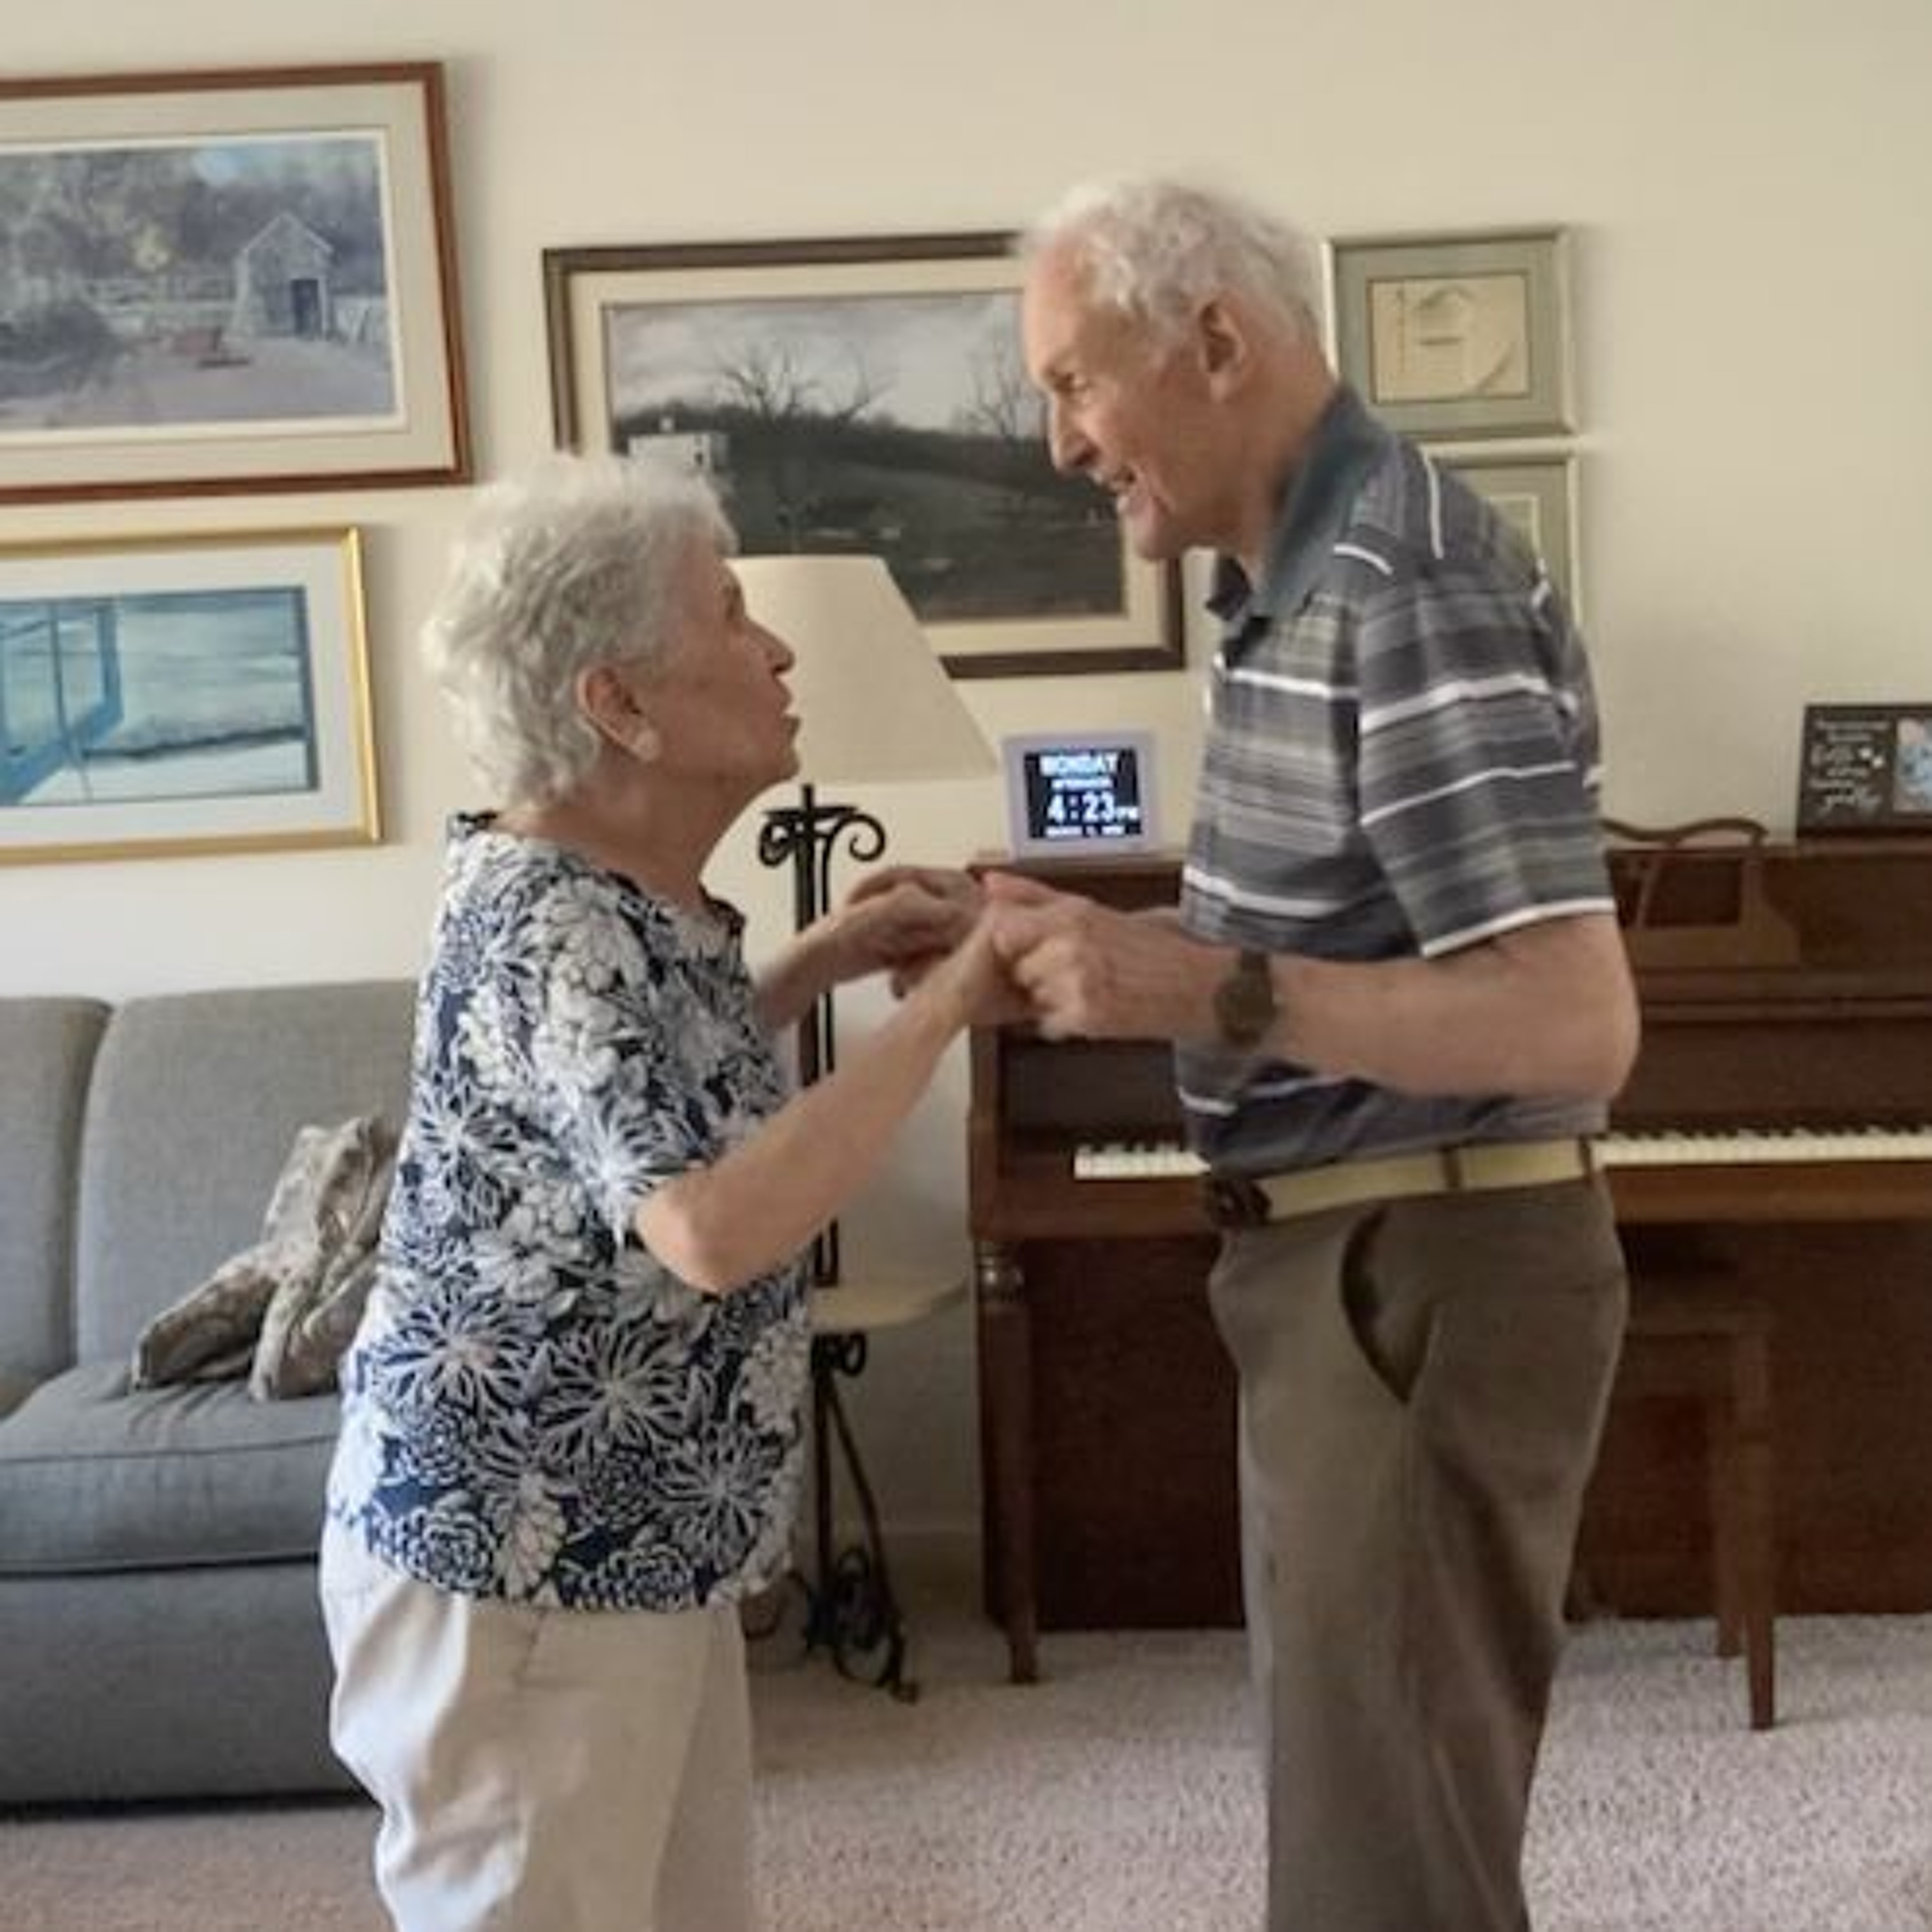 Caring for elderly parents, one challenge at a time